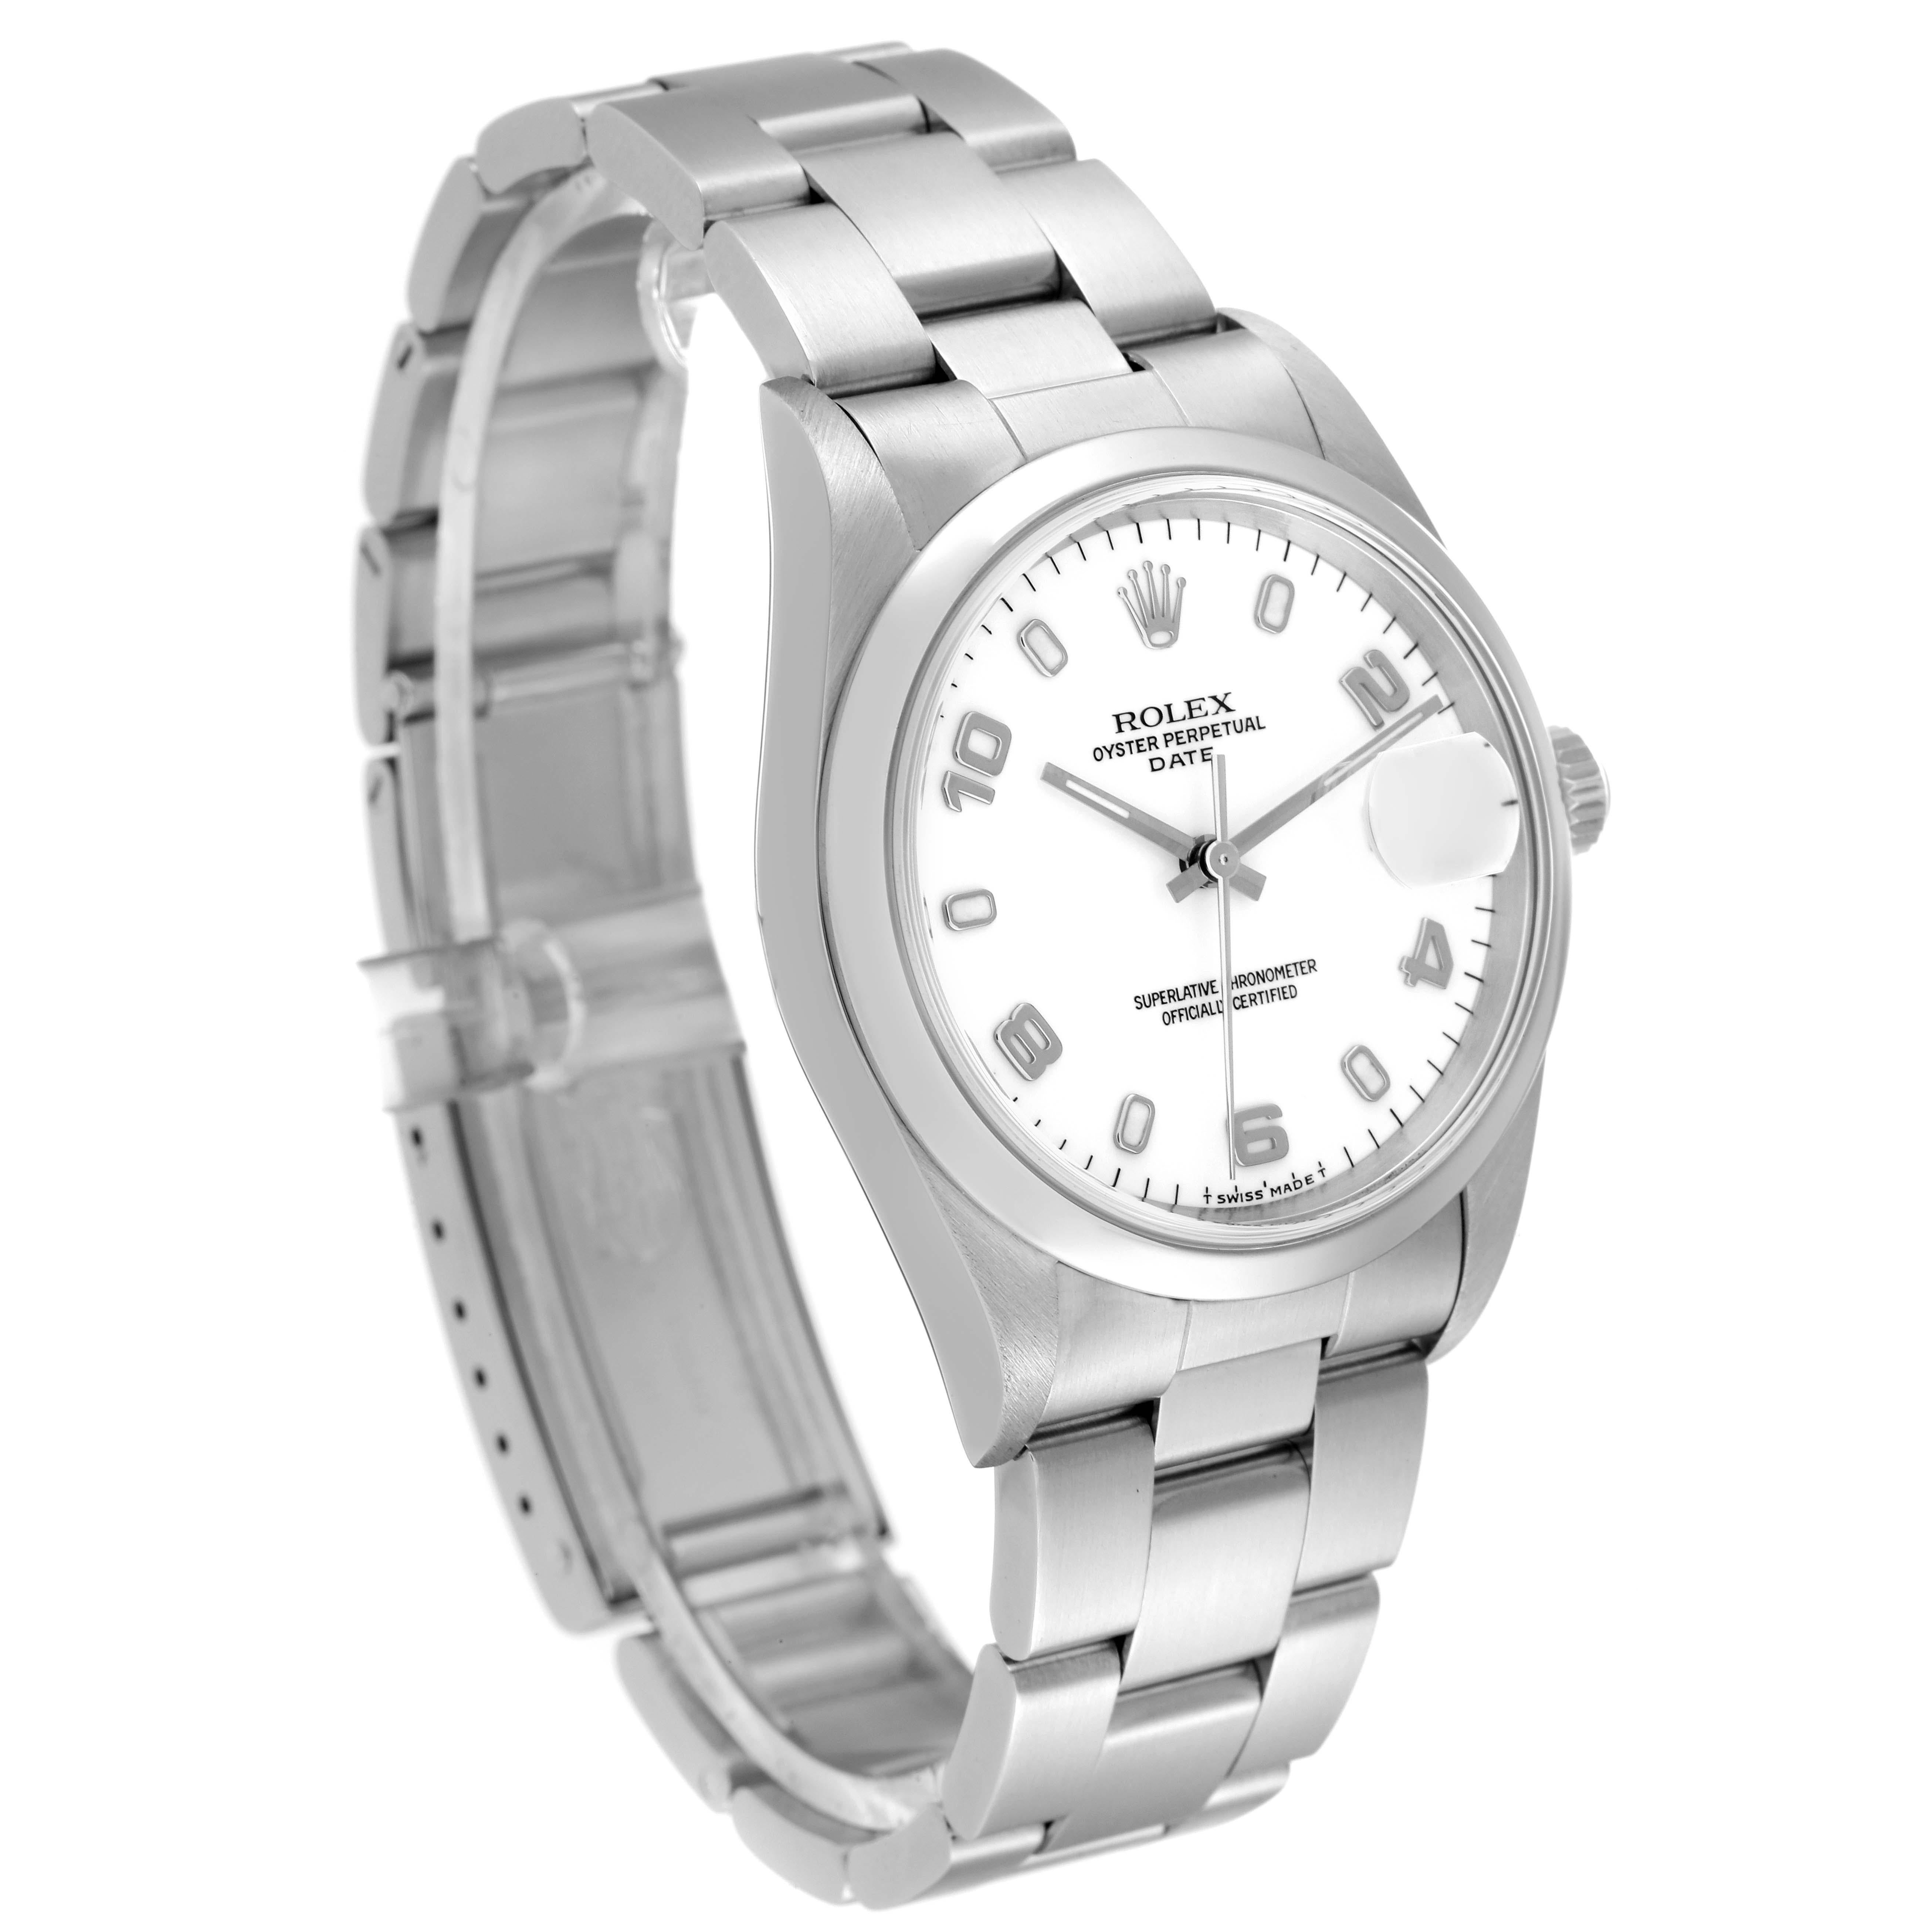 Rolex Date White Dial Oyster Bracelet Steel Mens Watch 15200 In Excellent Condition For Sale In Atlanta, GA